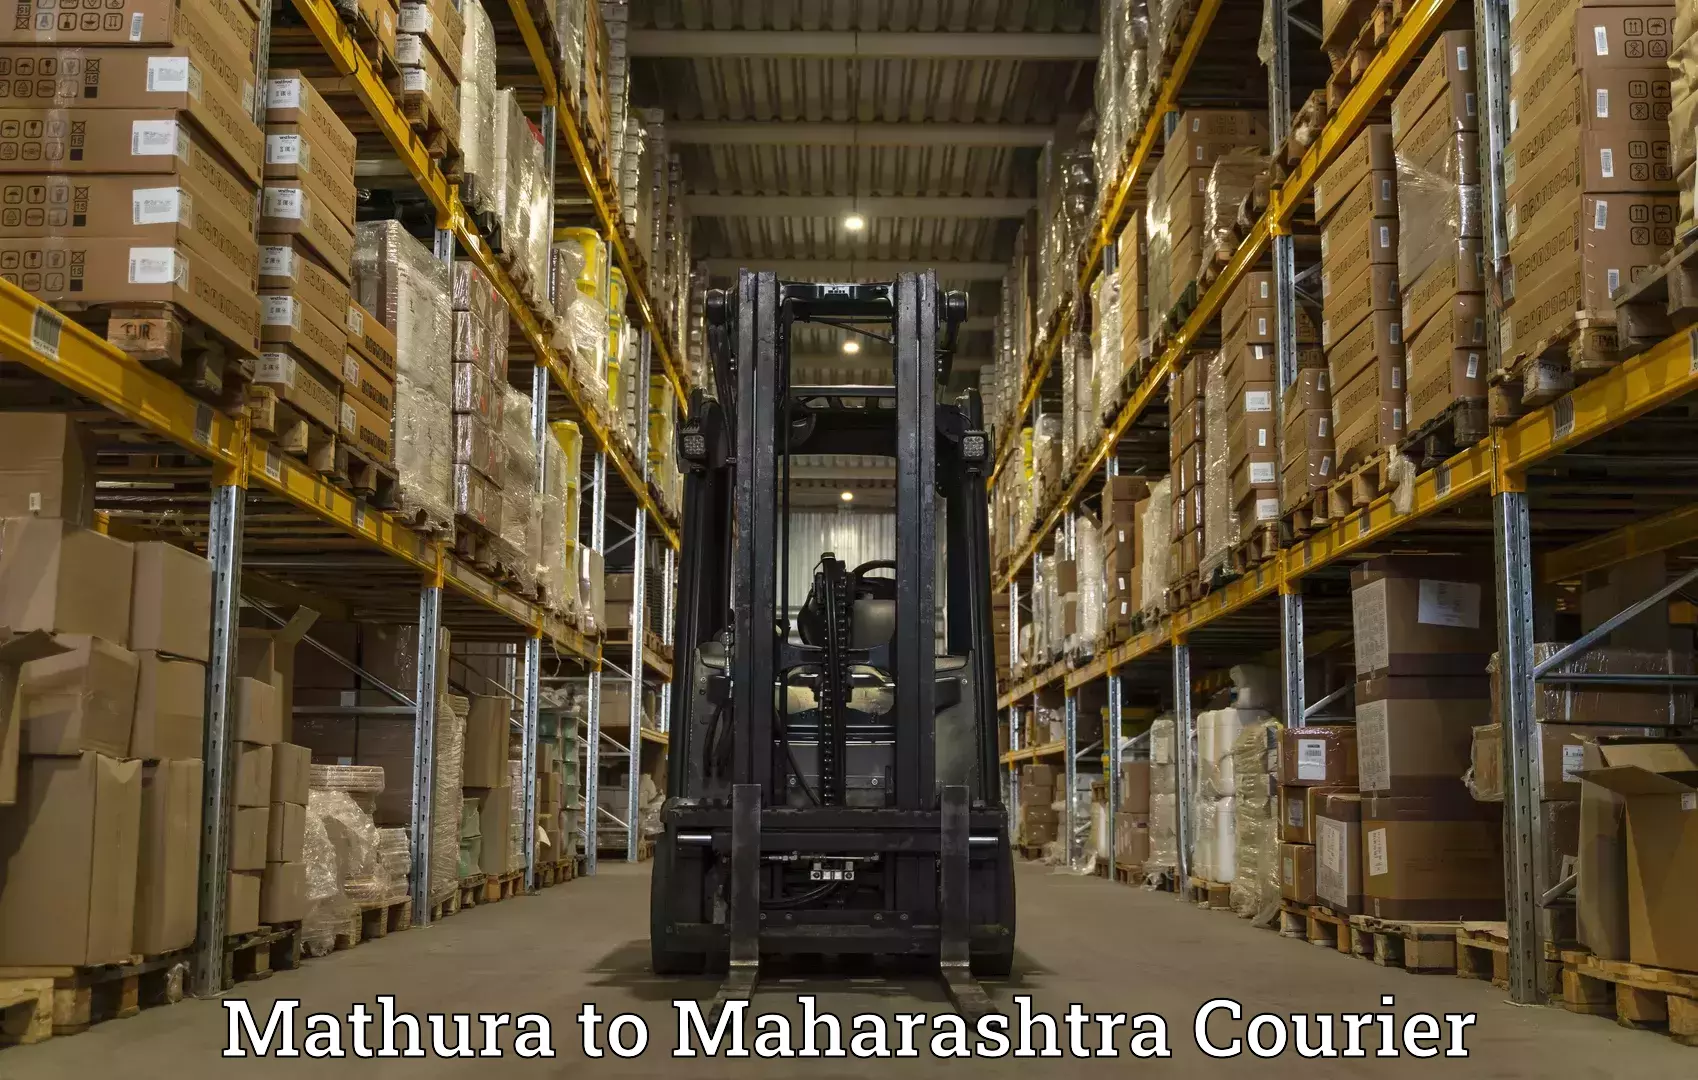 User-friendly delivery service Mathura to Andheri